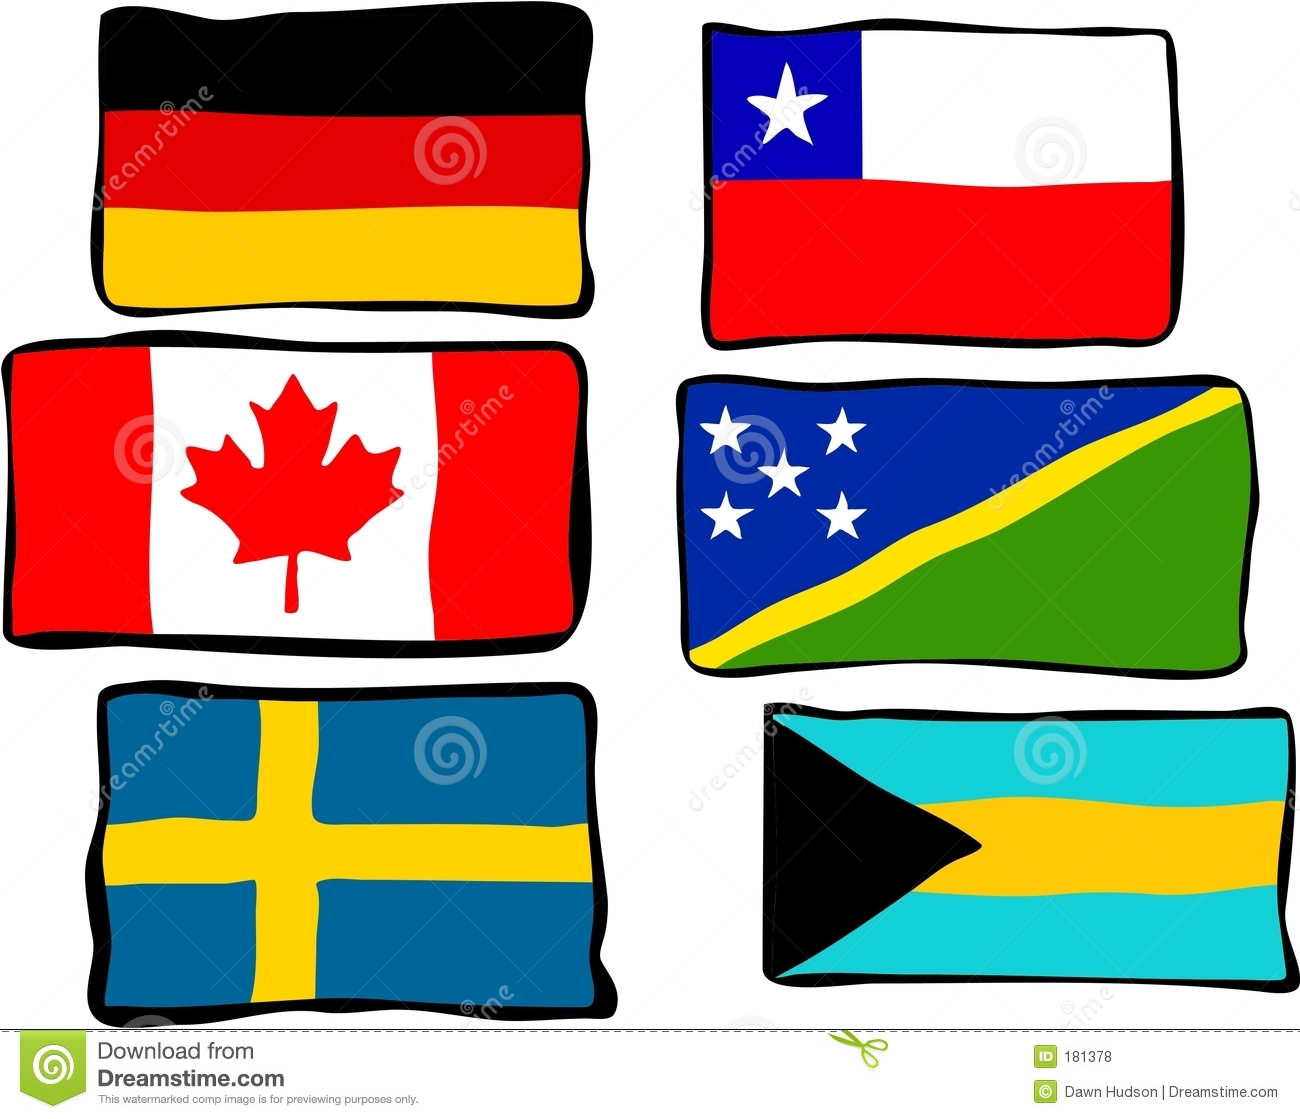 flags of the world clipart - photo #25